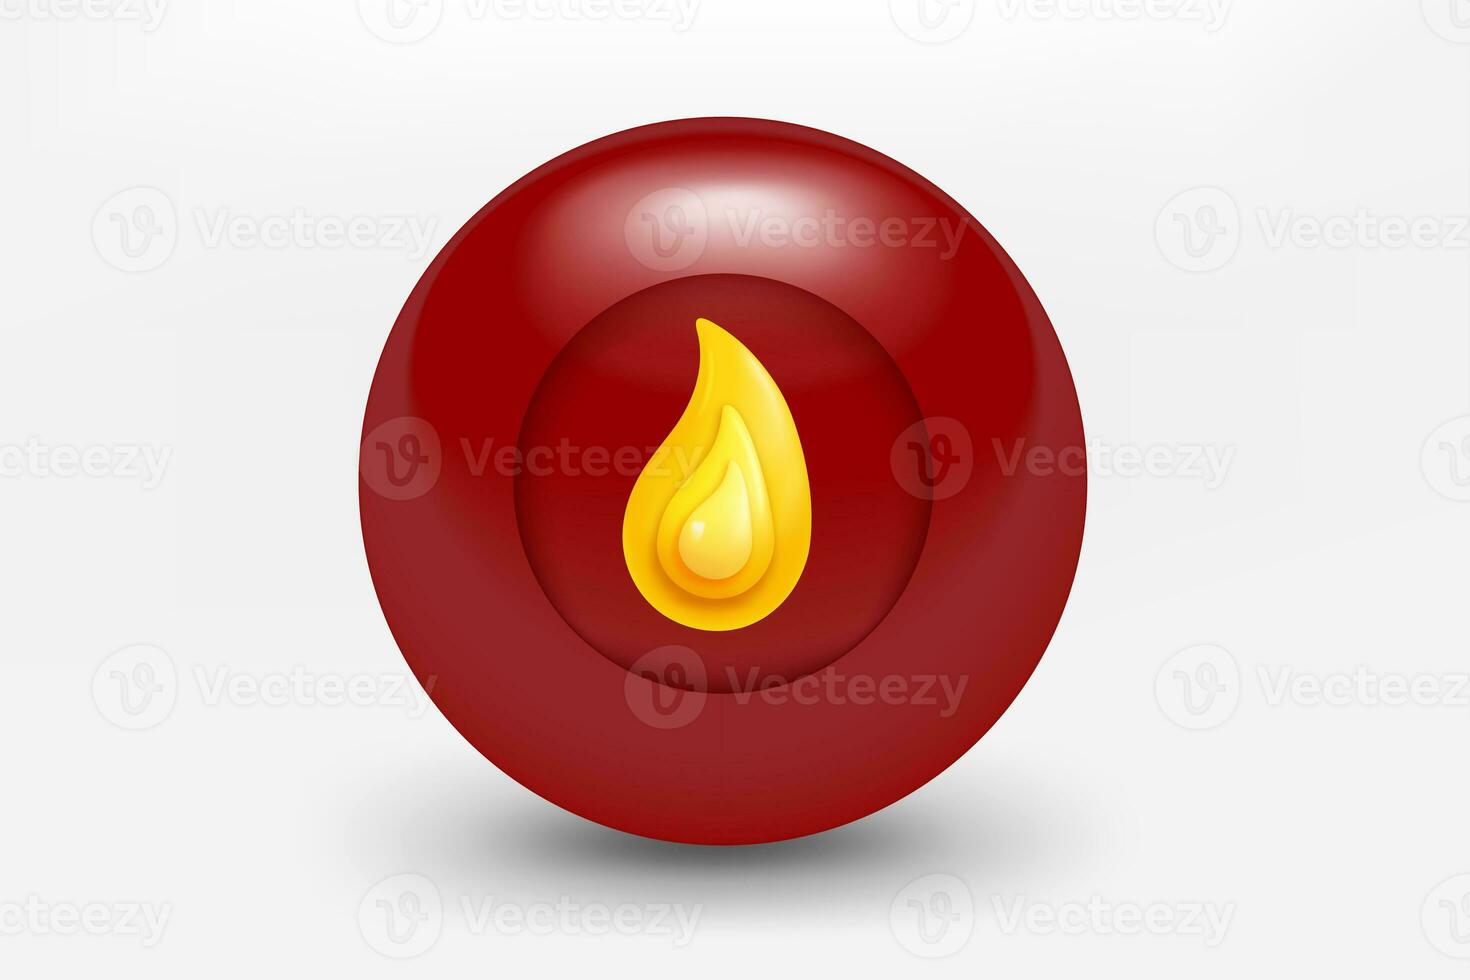 Red ball with golden flame icon. 3d vector illustration photo